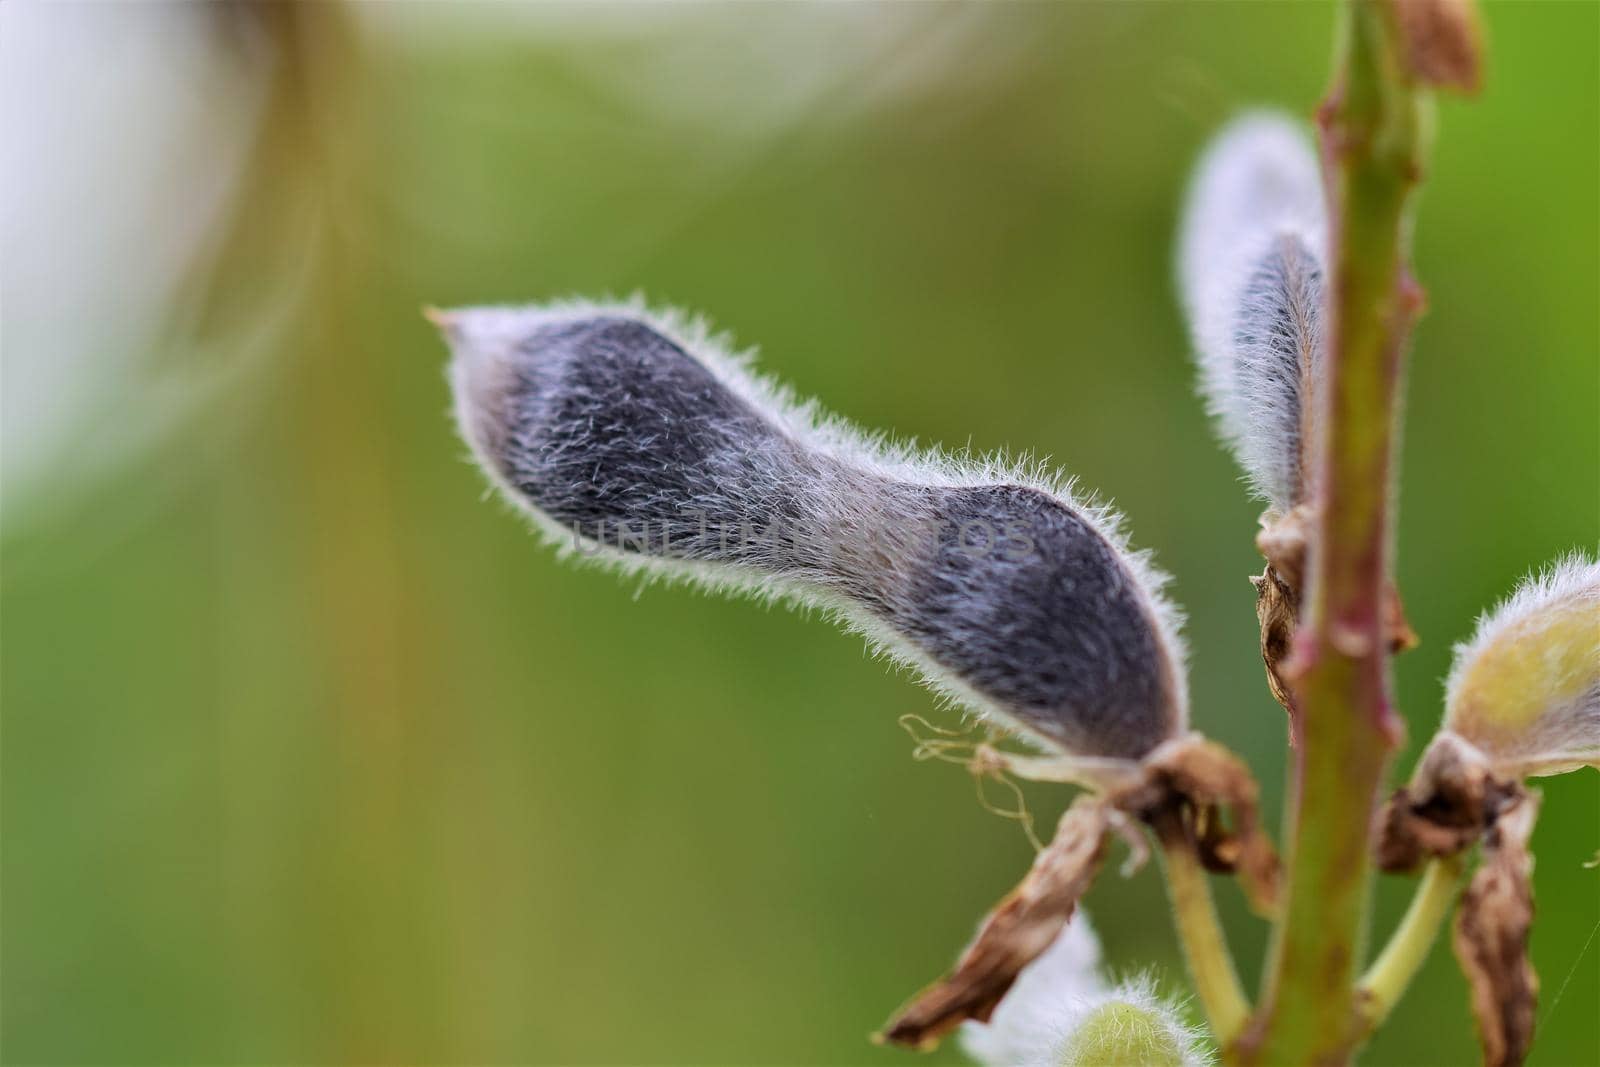 Close up of a black ripe lupine pod against a blurred green background by Luise123